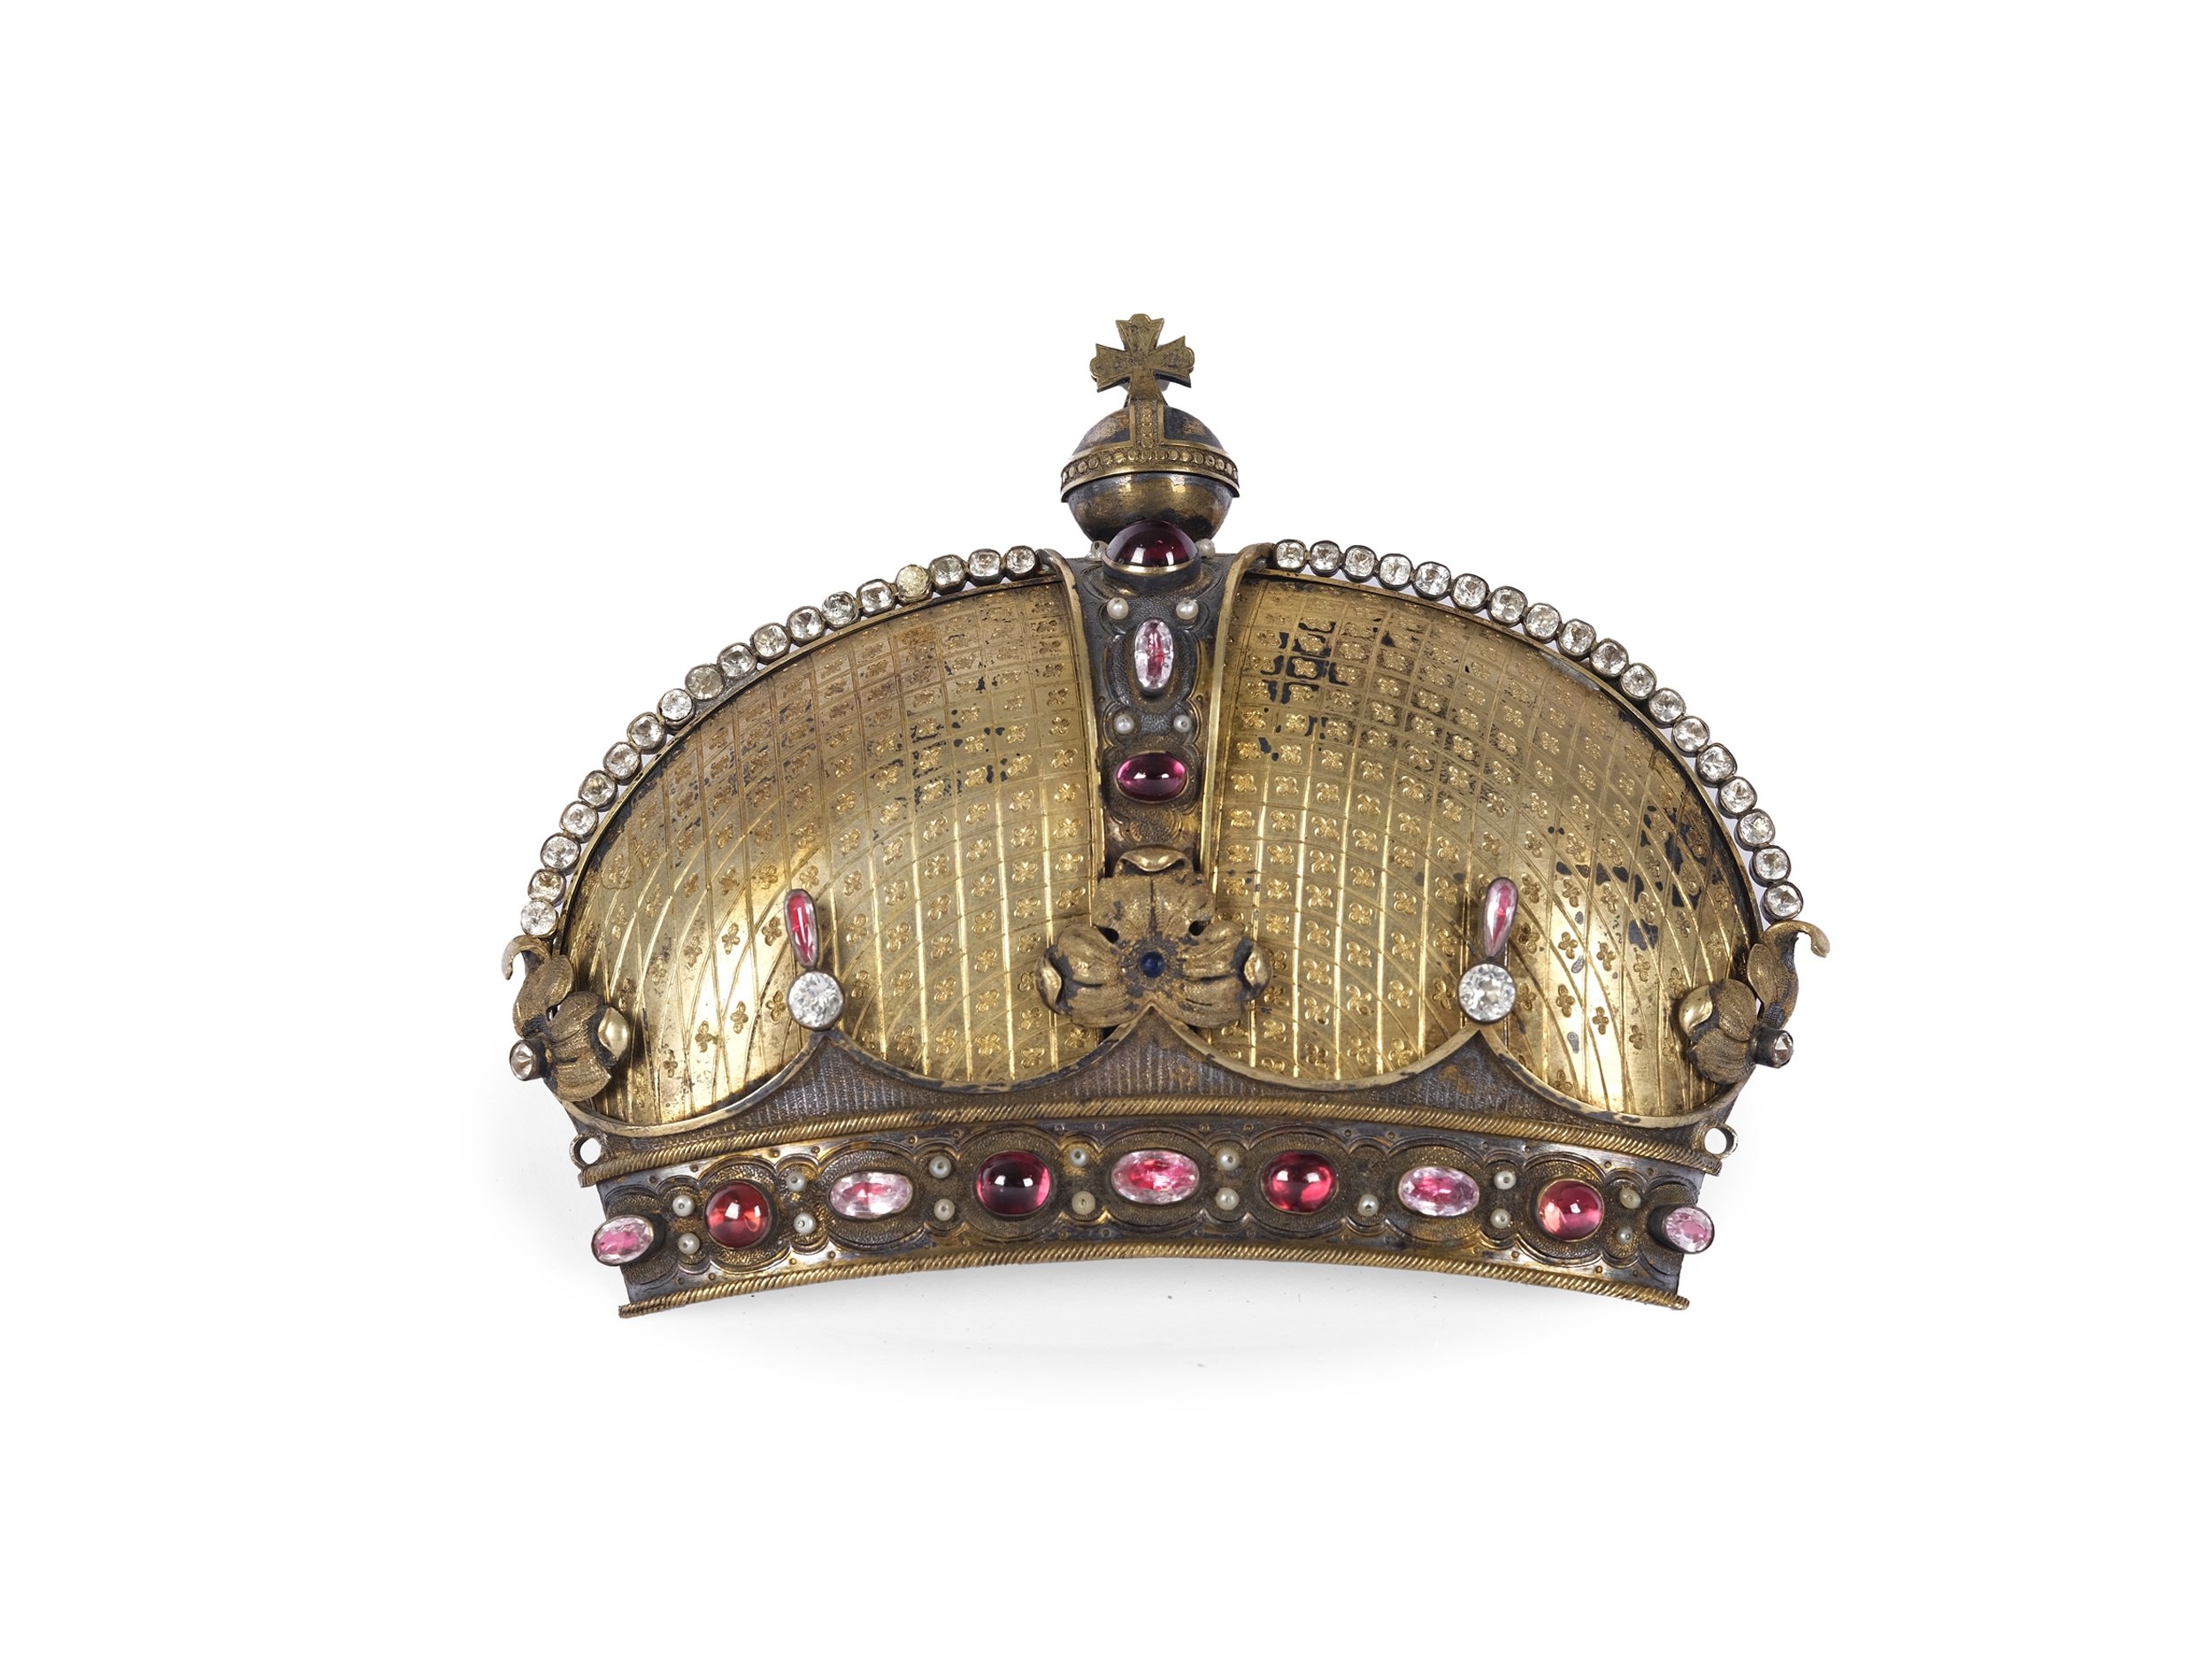 Crown in the Fabergé style, 19th century